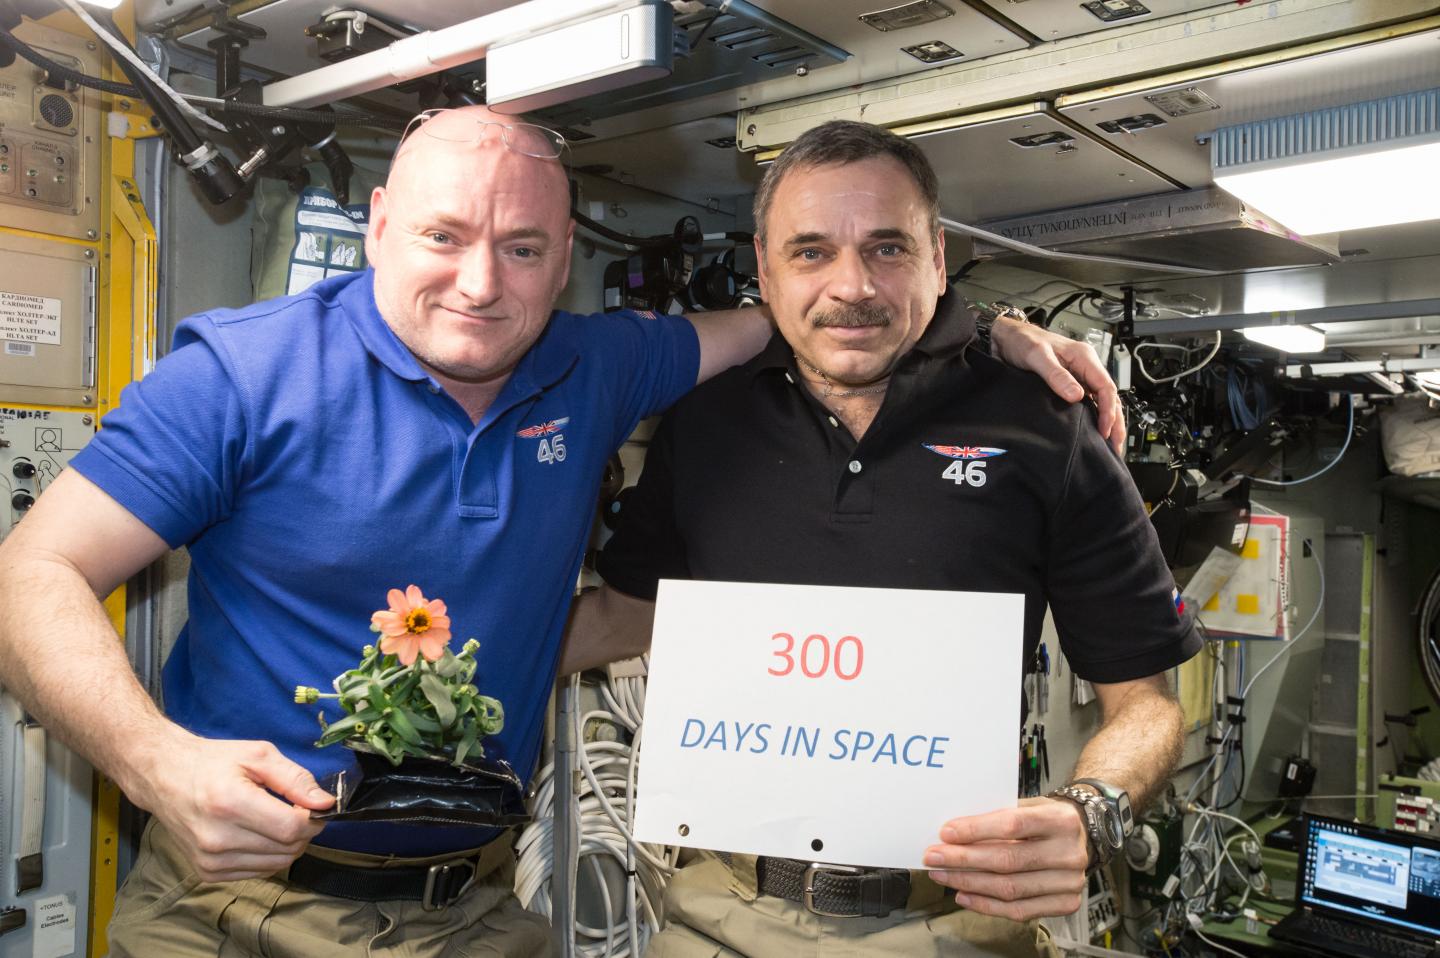 Scott Kelly Returns to Earth, but Science for NASA's Journey to Mars Continues